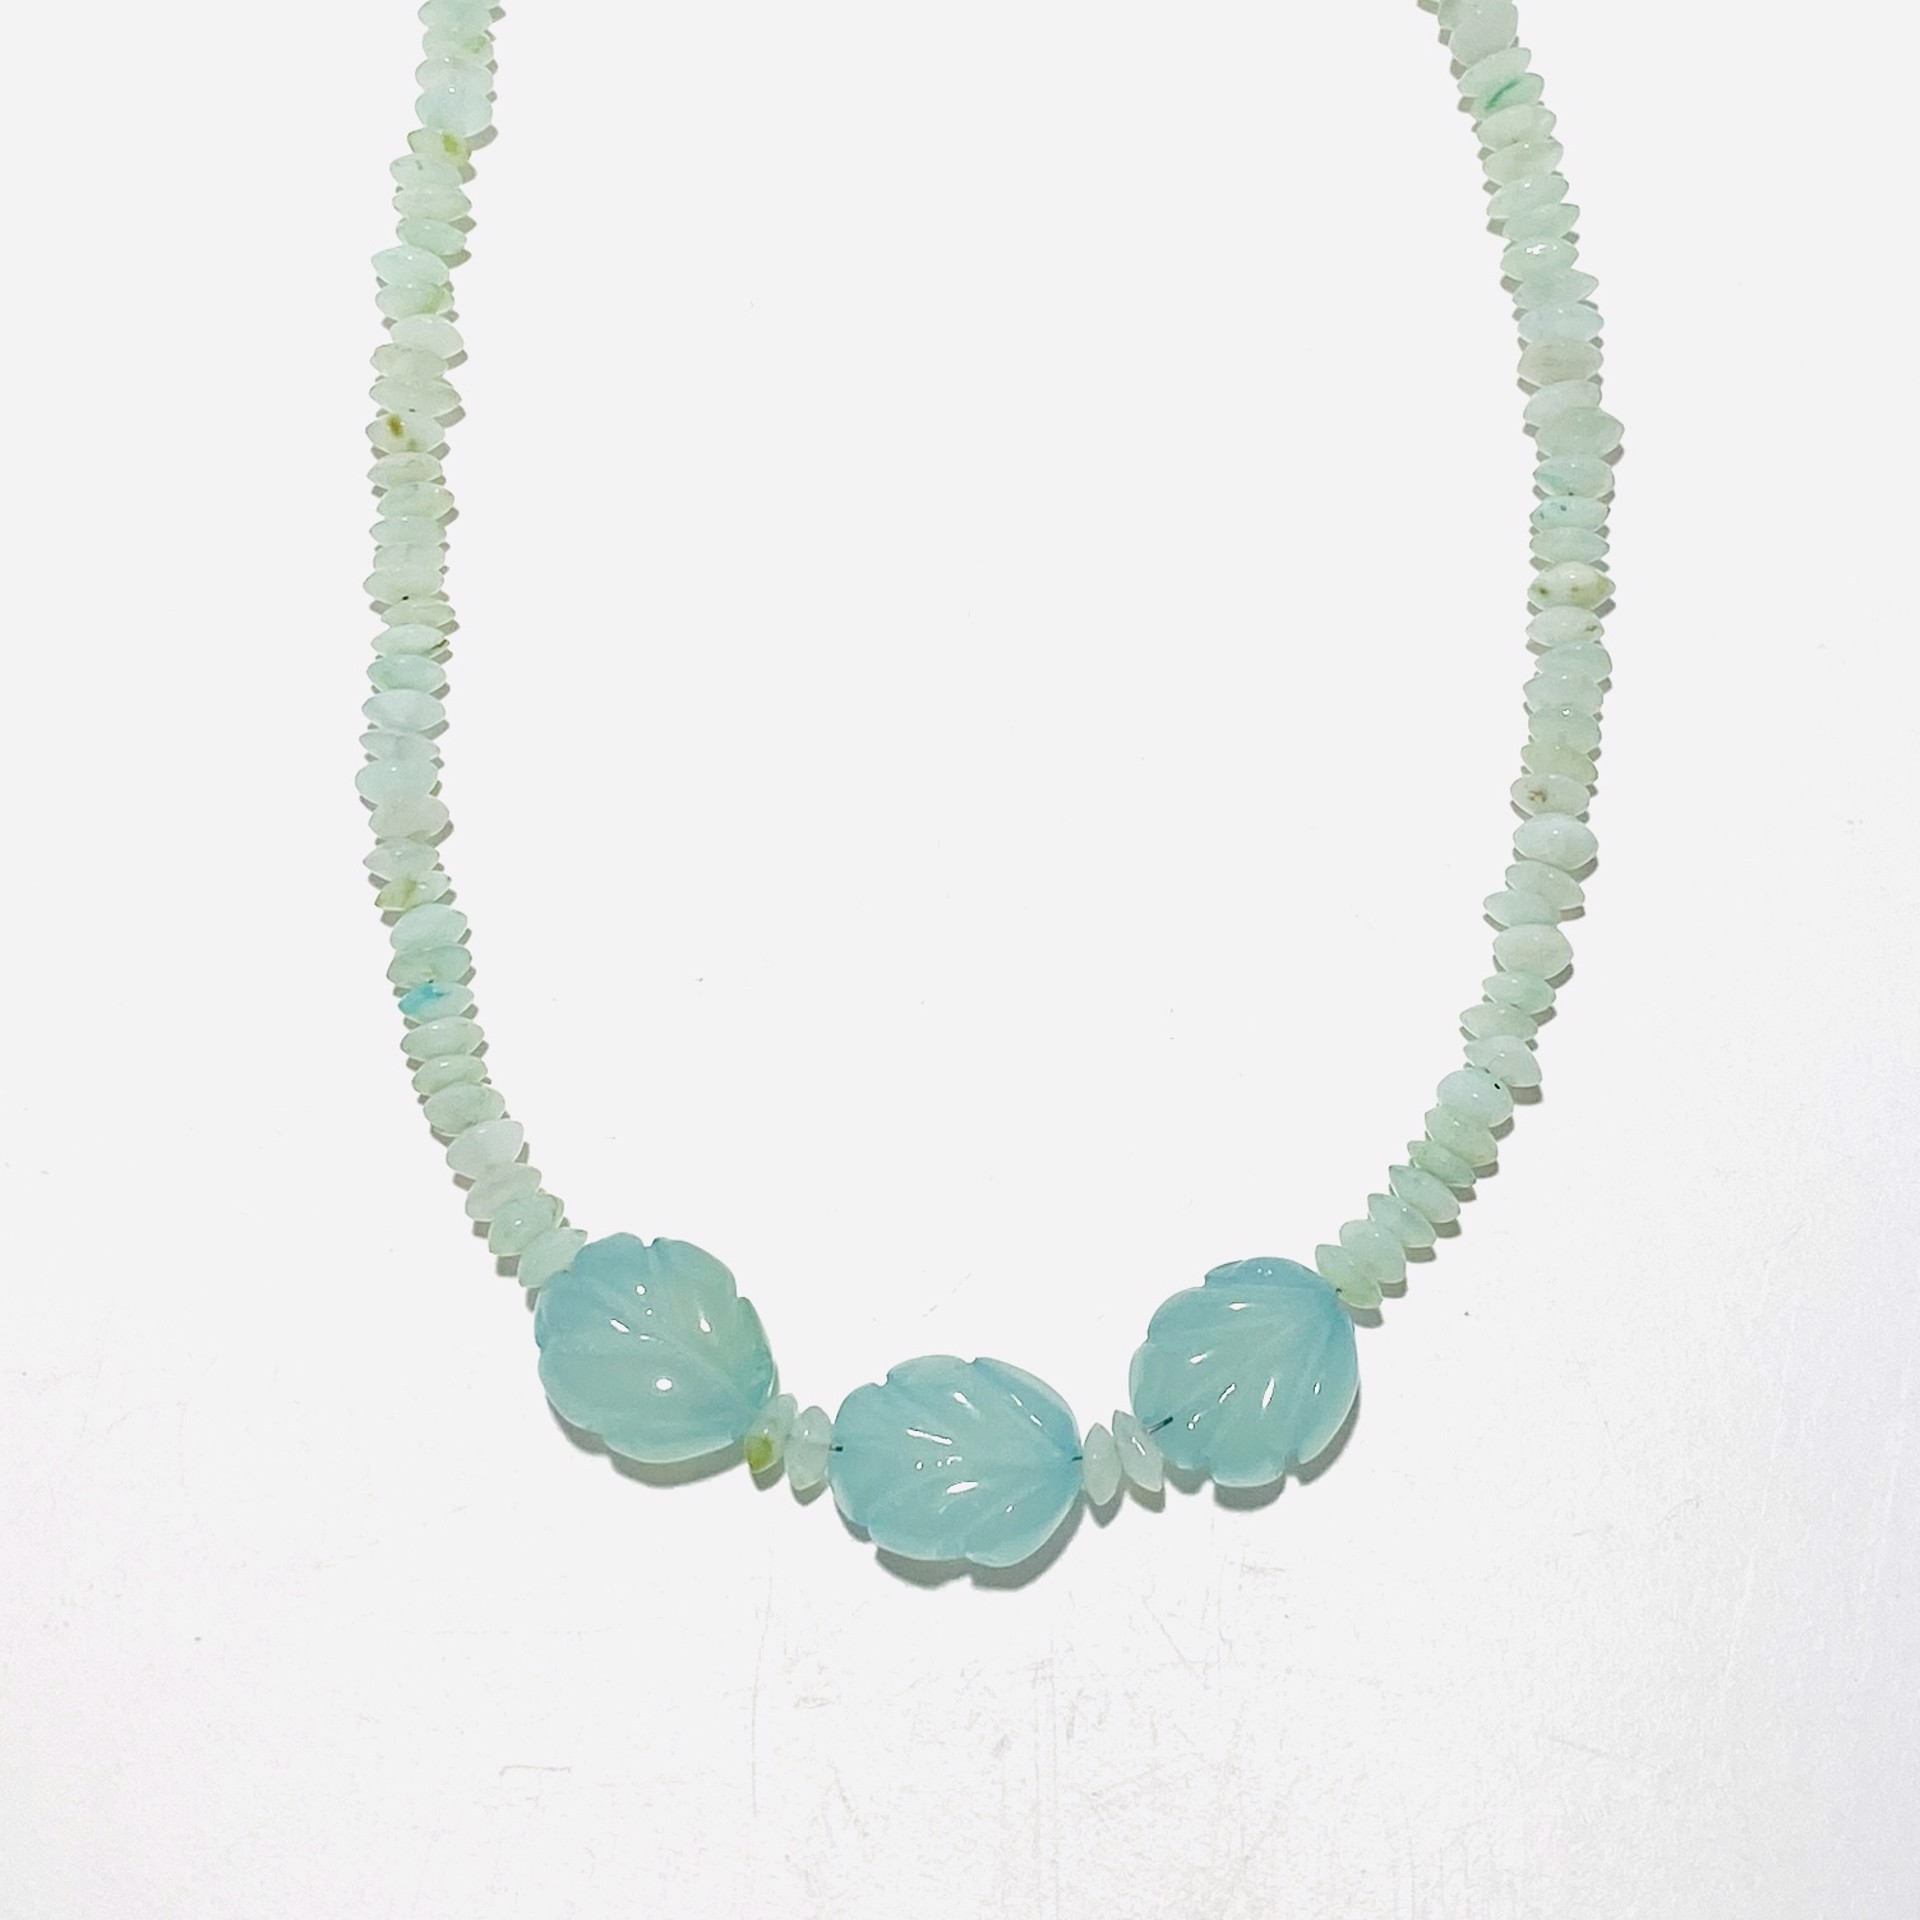 Peruvian Opal Bead Three Carved Aqua Chalcedony Leaves Necklace by Nance Trueworthy